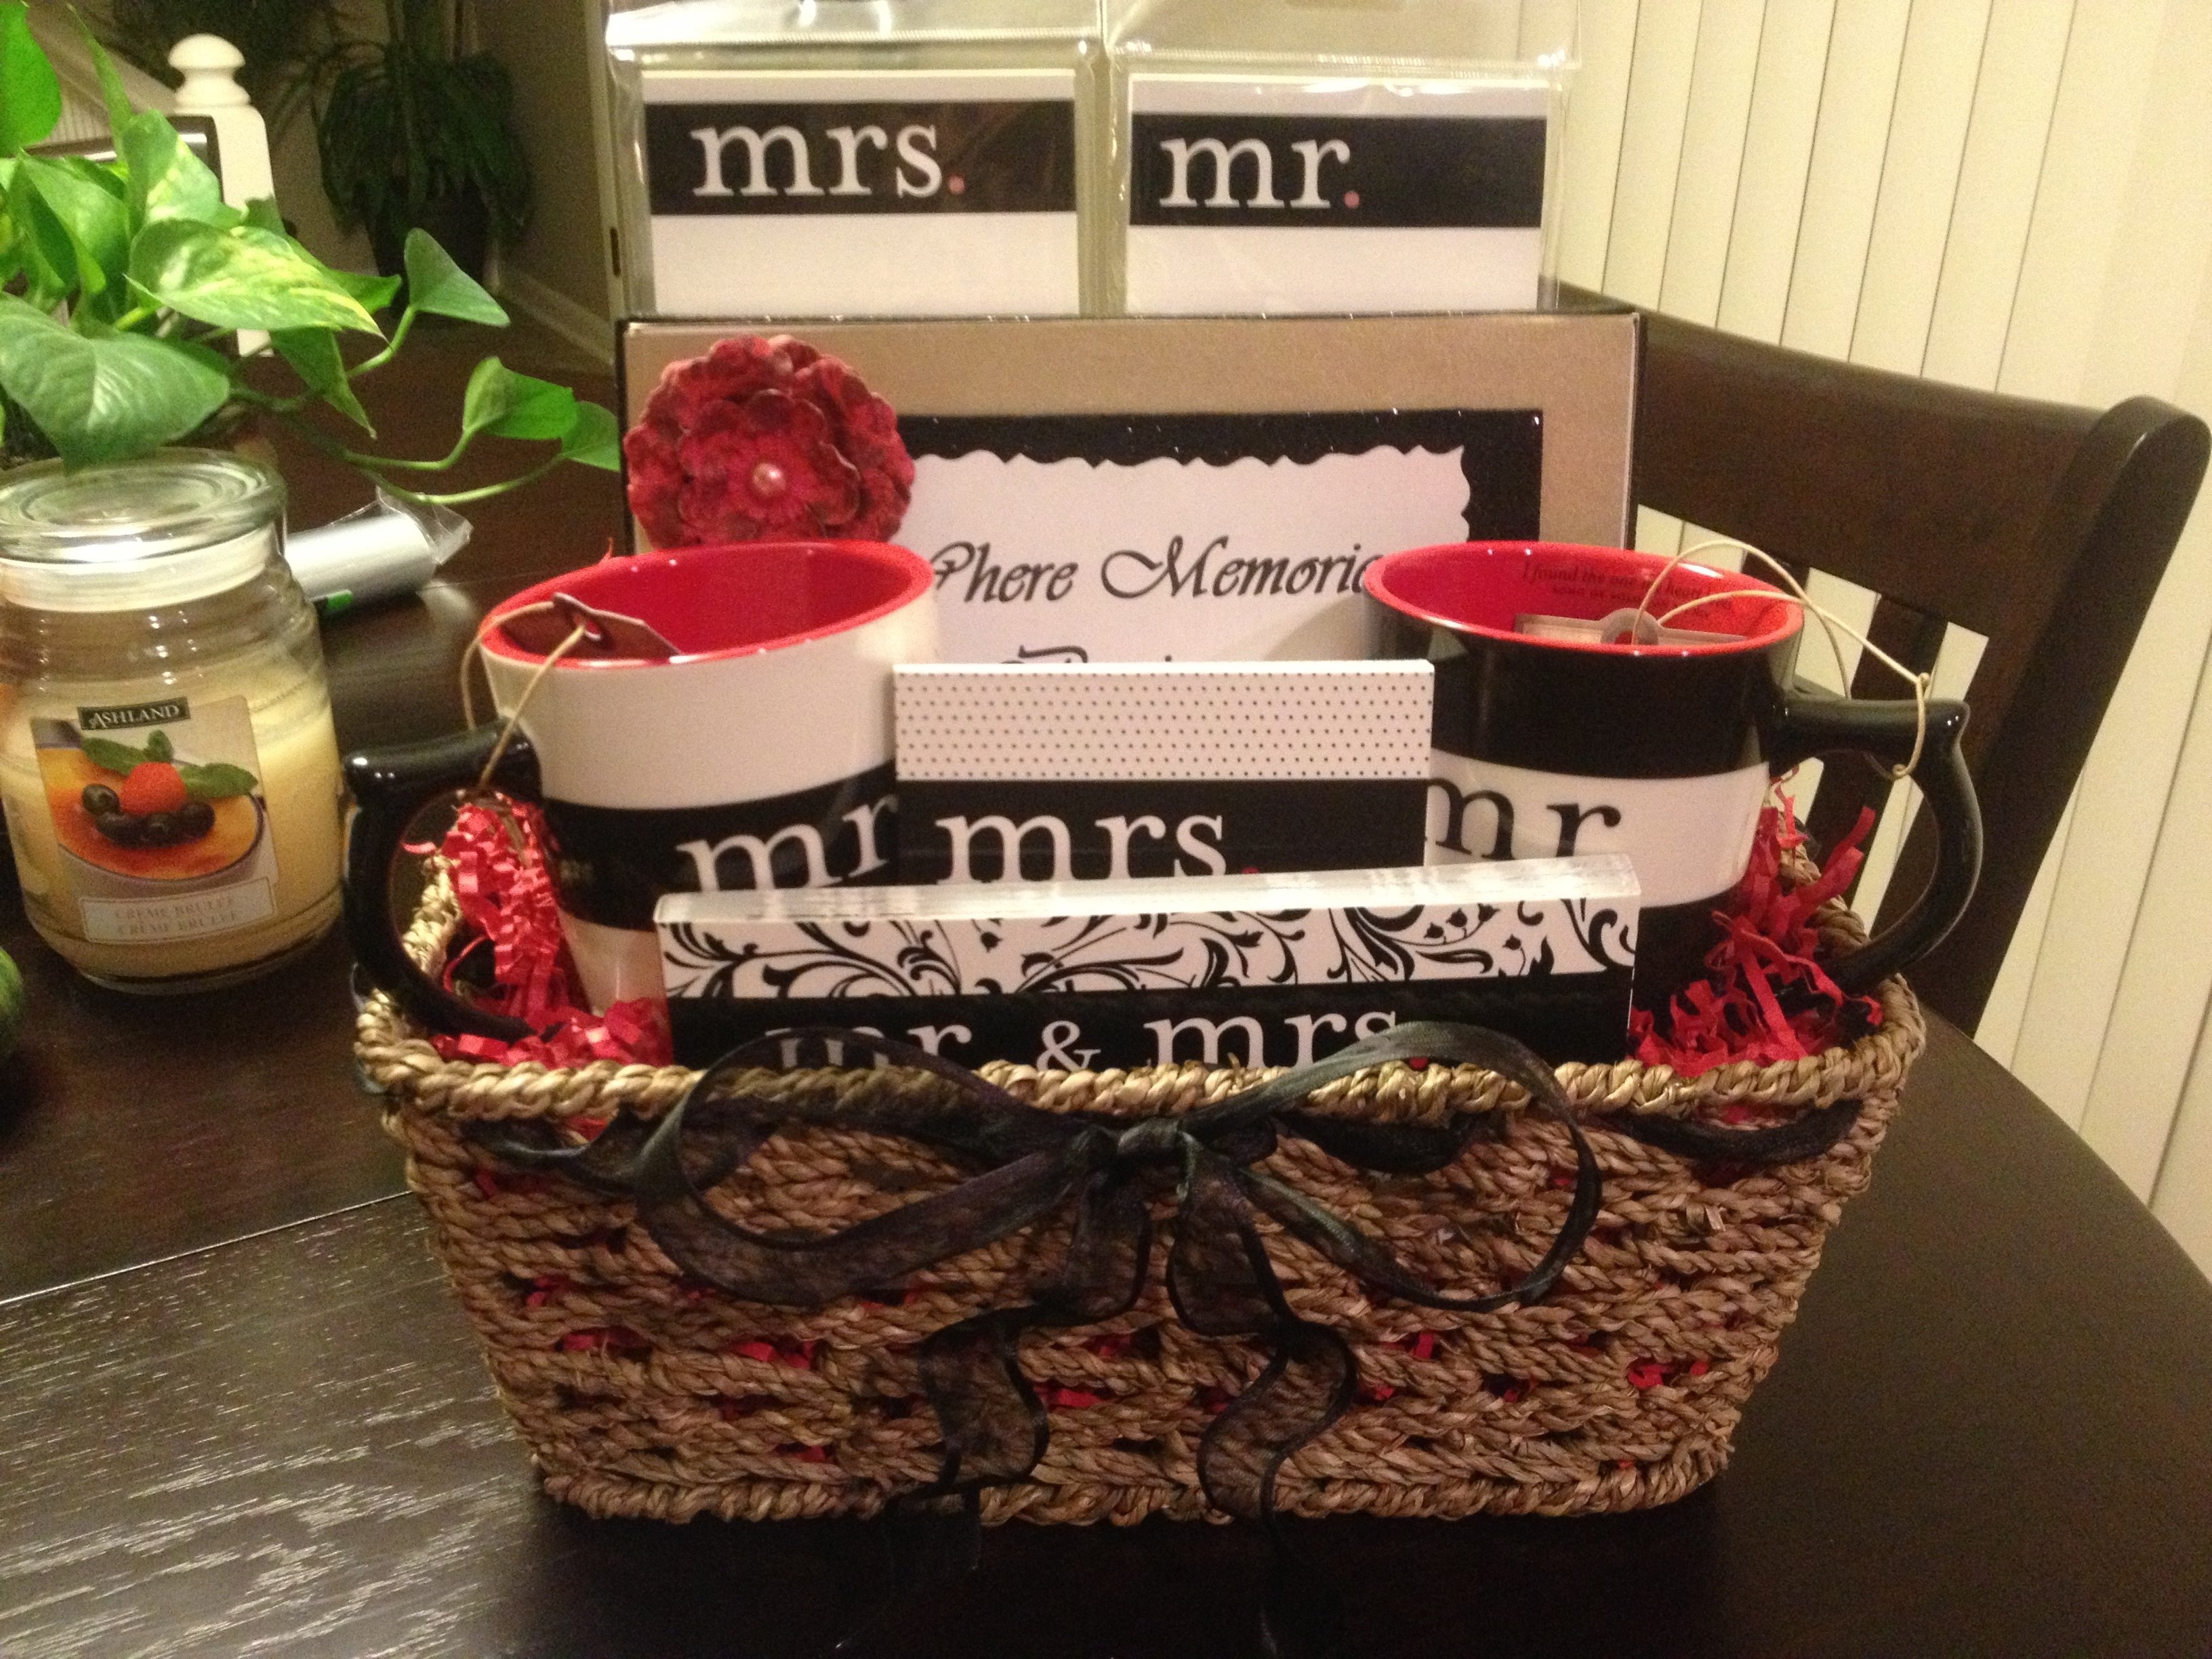 10 Most Popular Homemade Bridal Shower Gift Ideas cute homemade bridal shower gift basket the mr mrs gift items 3 2022